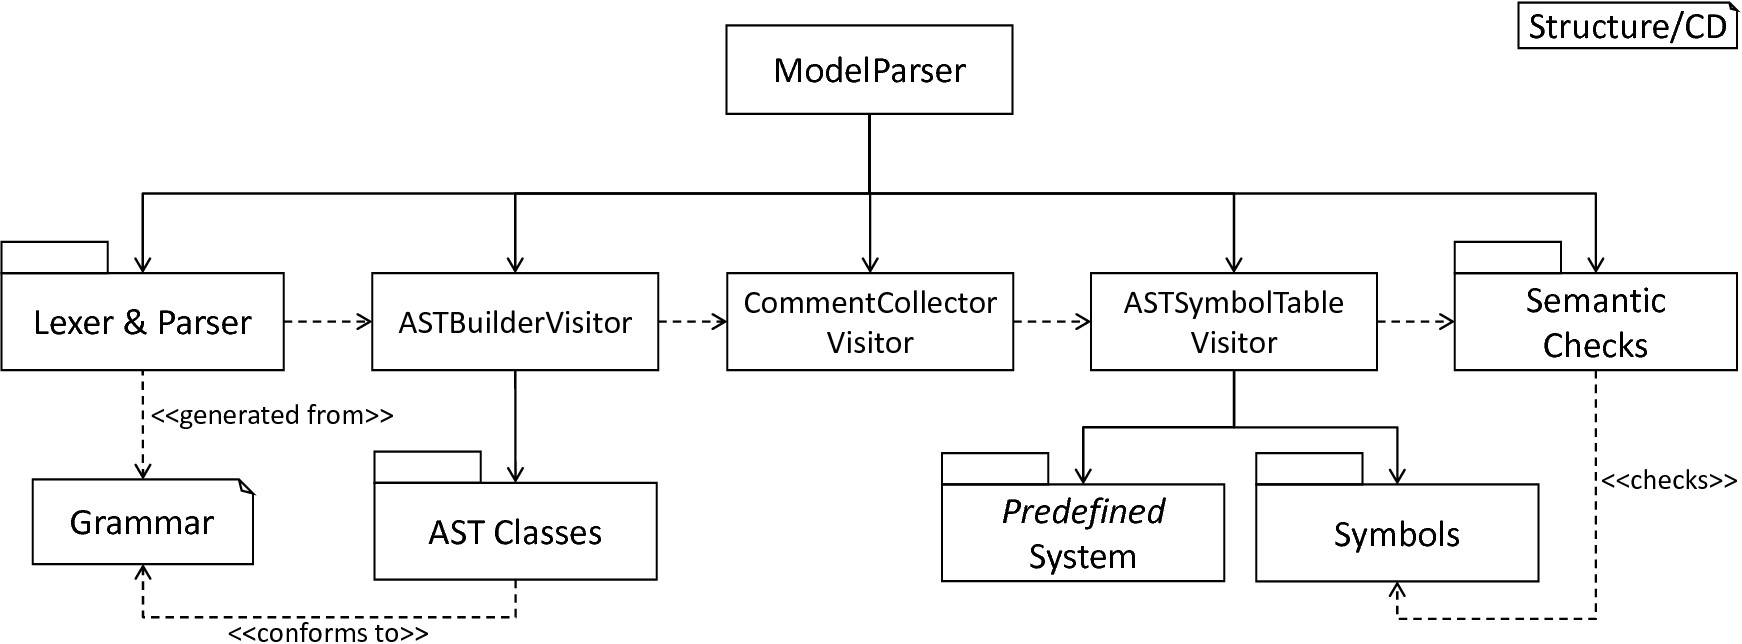 Overview of the model-processing Frontend